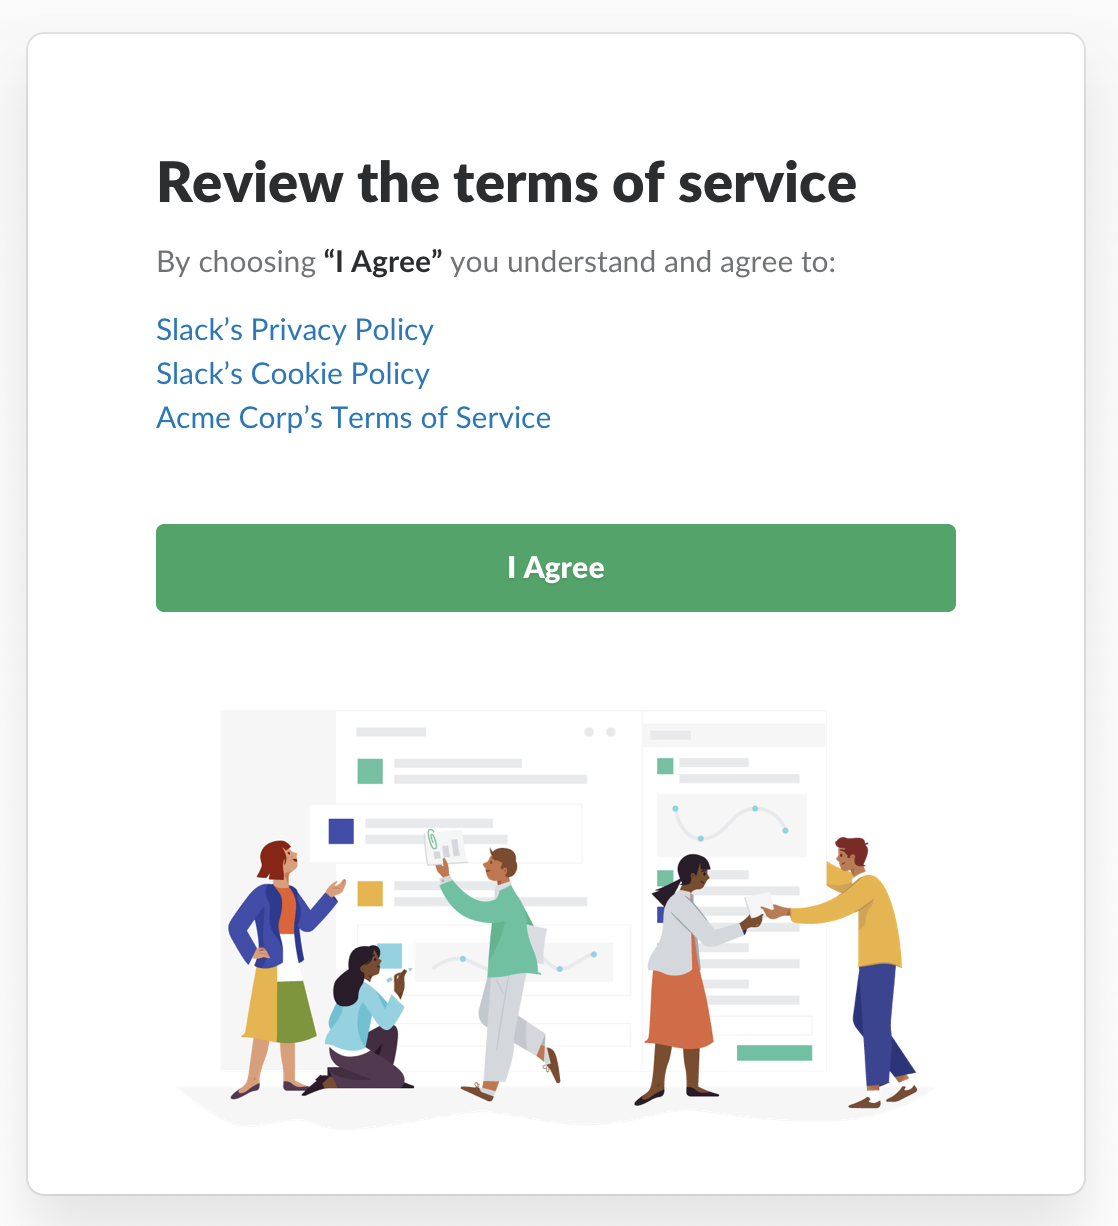 Prompt to review the terms of service for Slack and the Enterprise Grid organization